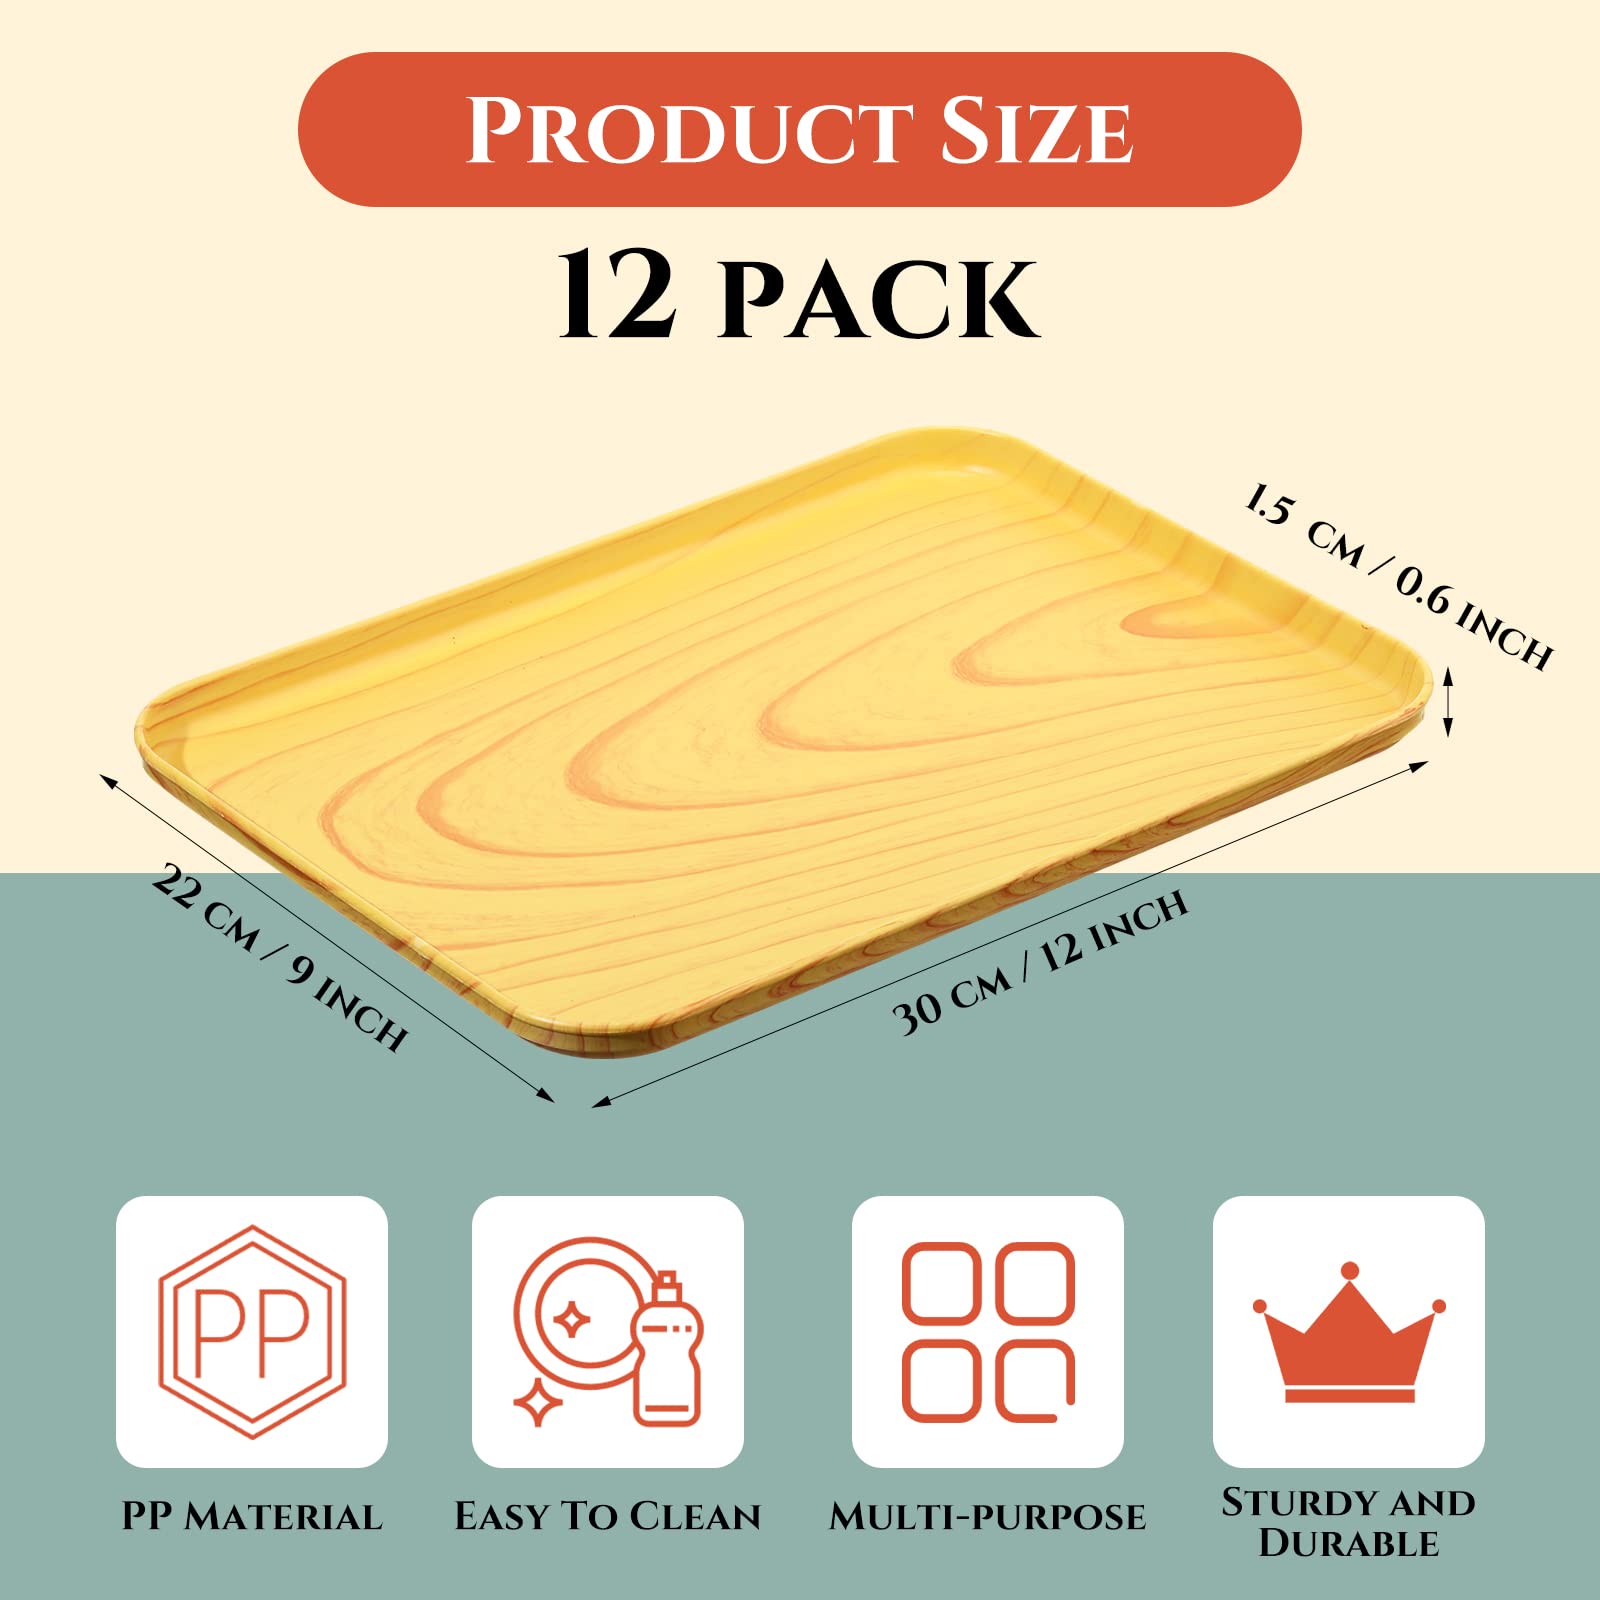 12 Pcs Plastic Wood Grain Serving Tray Fast Food Cafeteria Trays 11.8 x 8.7'' Rectangular Lunch Food Serving Platters Tray Plastic Platter for Kitchen Restaurant School Dinner Party Bar Cafe Camping